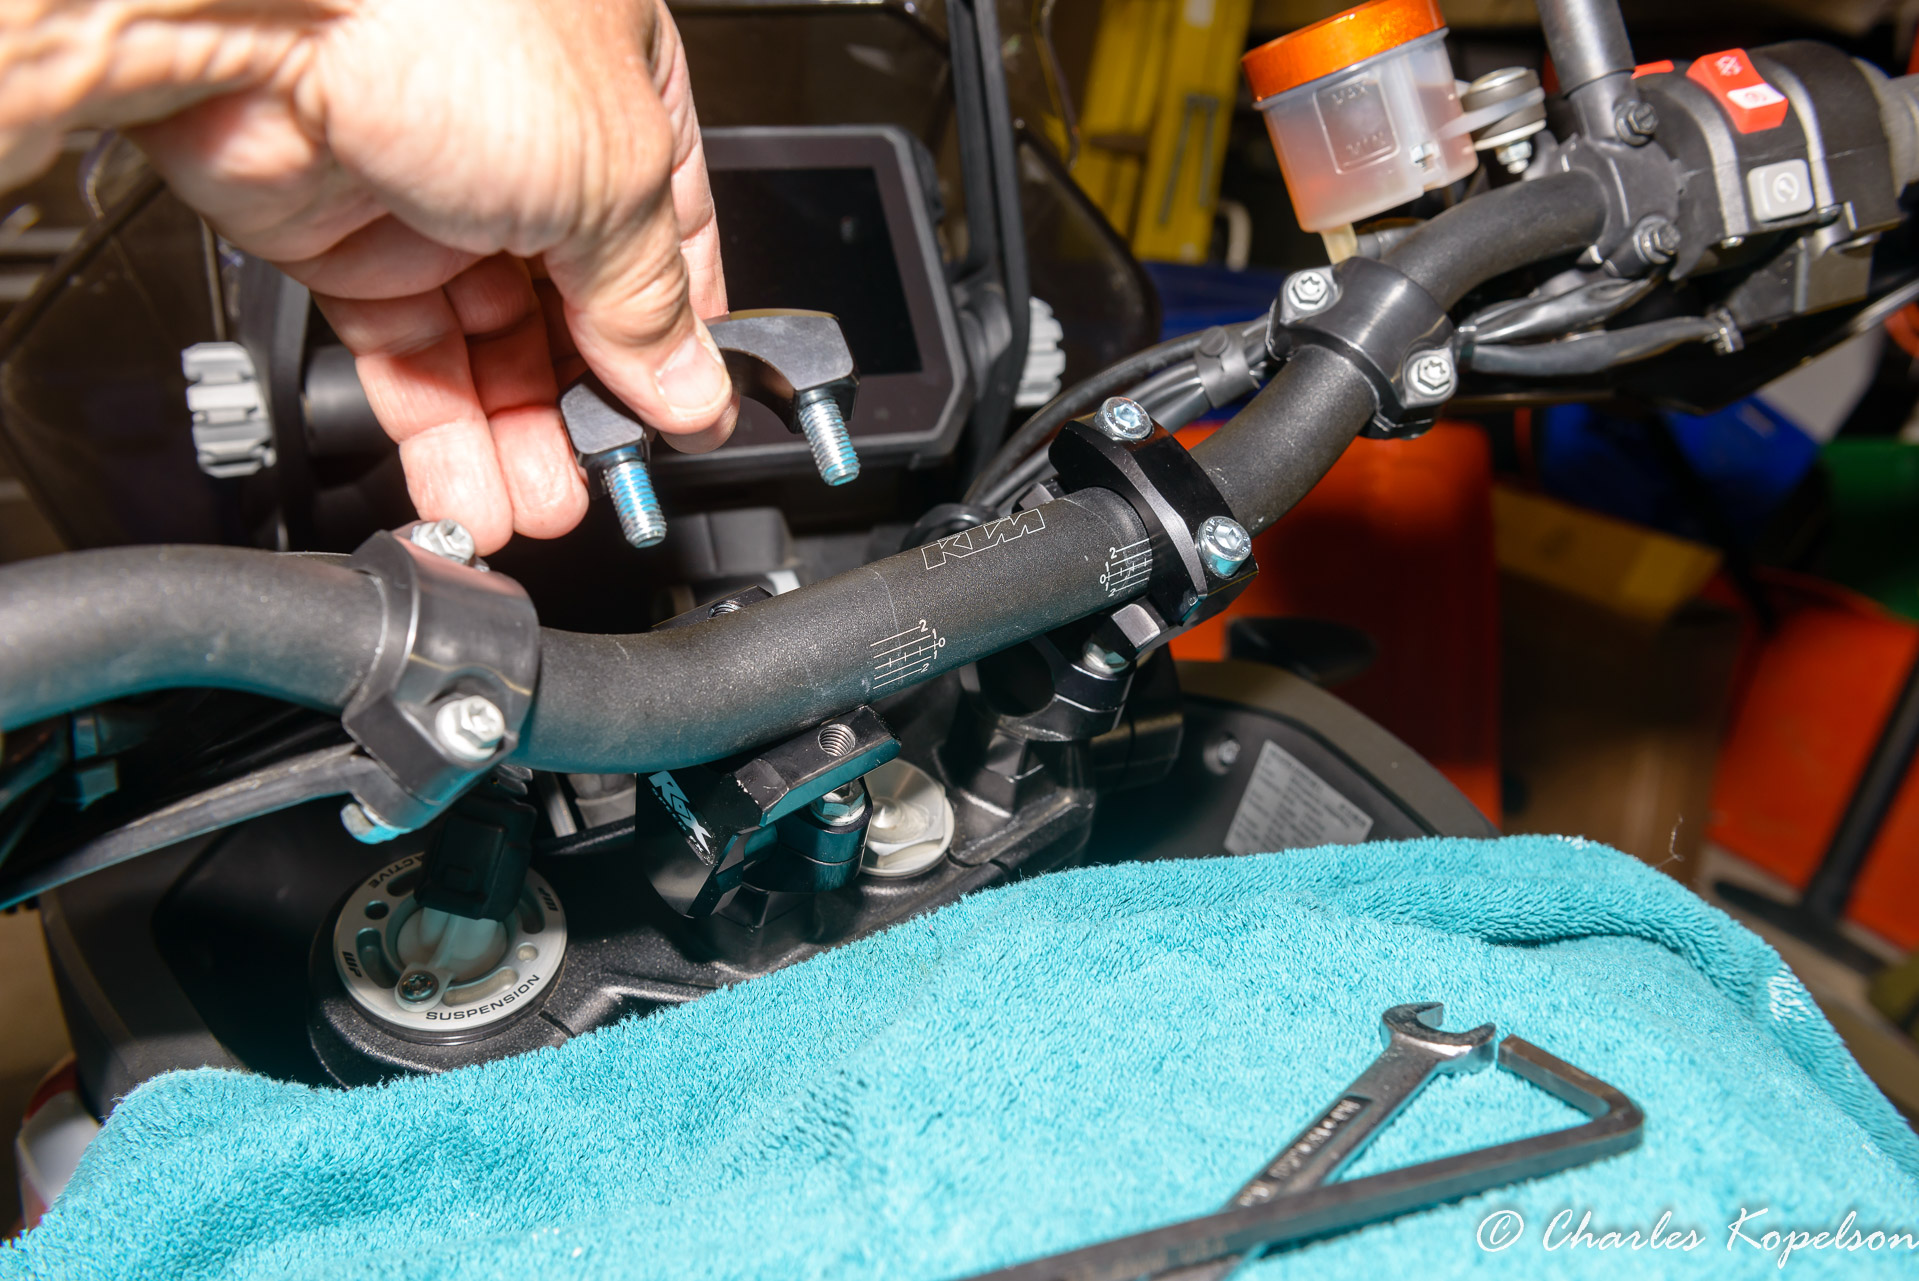 Set the handlebar down into the new risers and center it.  Place the top of the ROX clamps over the handlebar and lightly tighten with a 6mm hex wrench.